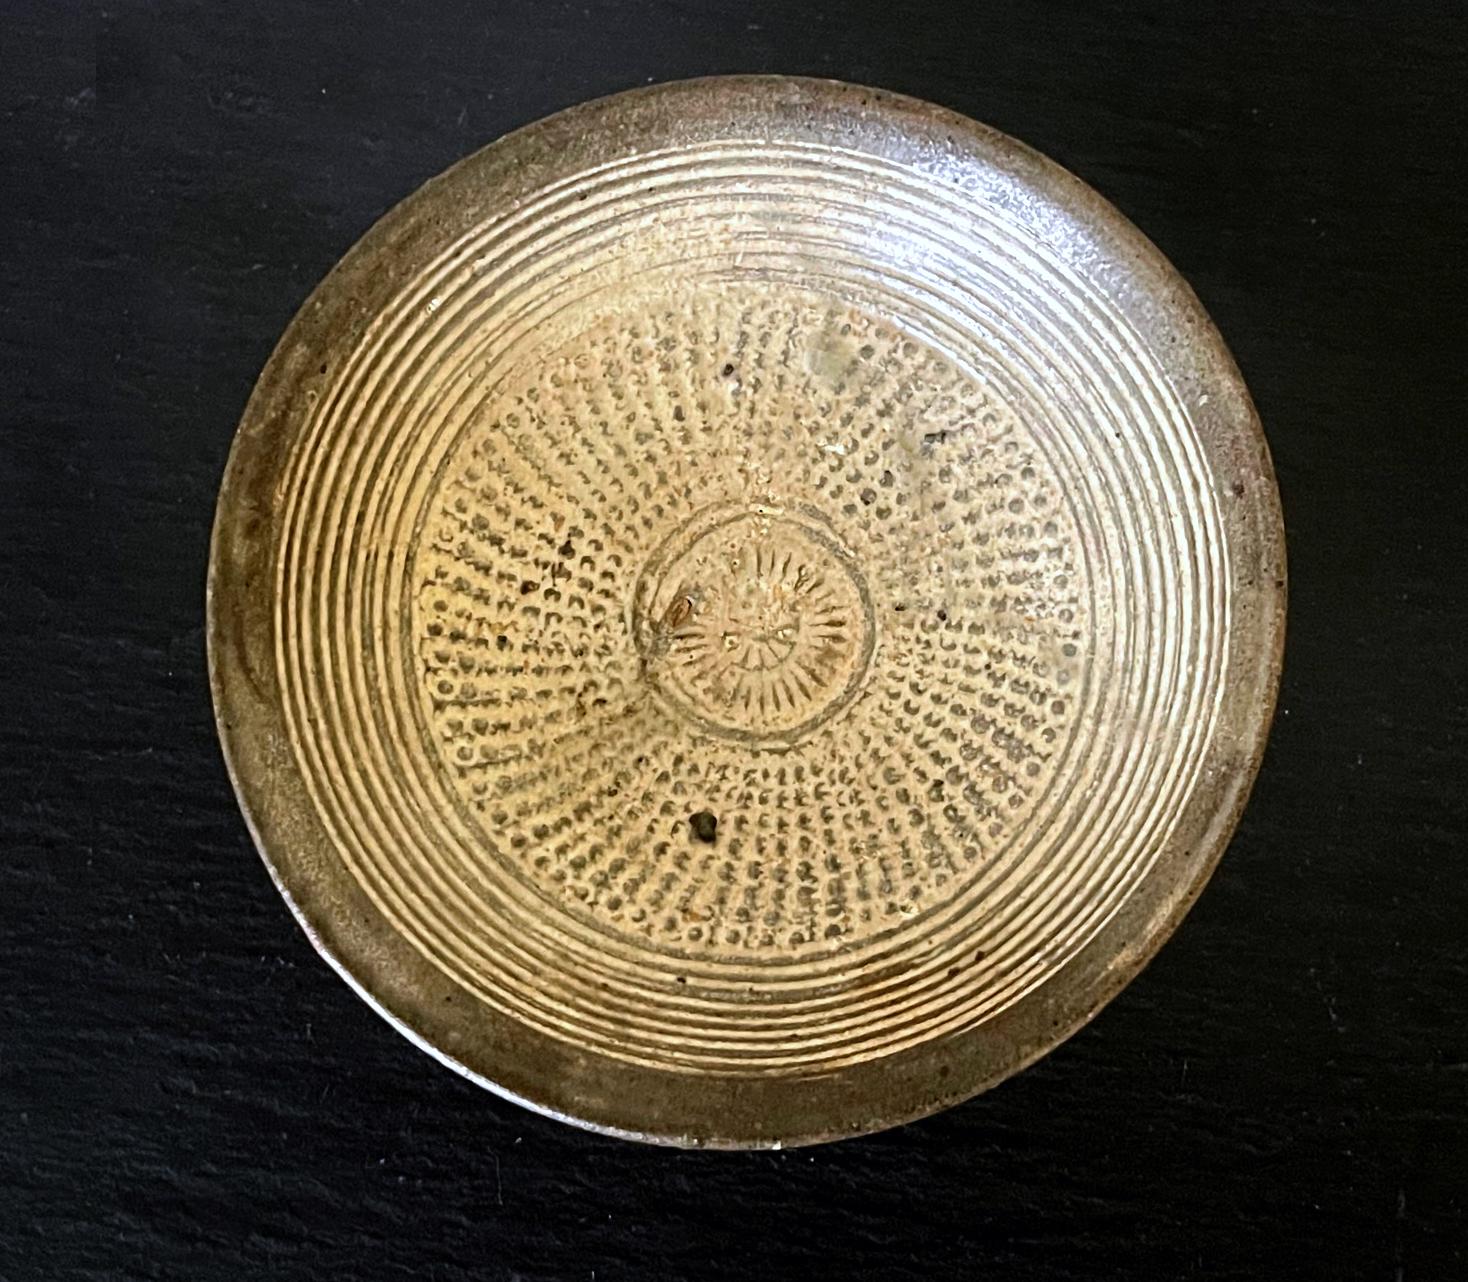 A small Korean ceramic shallow bowl on ringed foot in the classic Buncheong (or Punch'ong) style from Joseon Dynasty circa 15-16th century. Originally intended for wine-drinking likely, the bowl features a tight white slip decoration using stamping